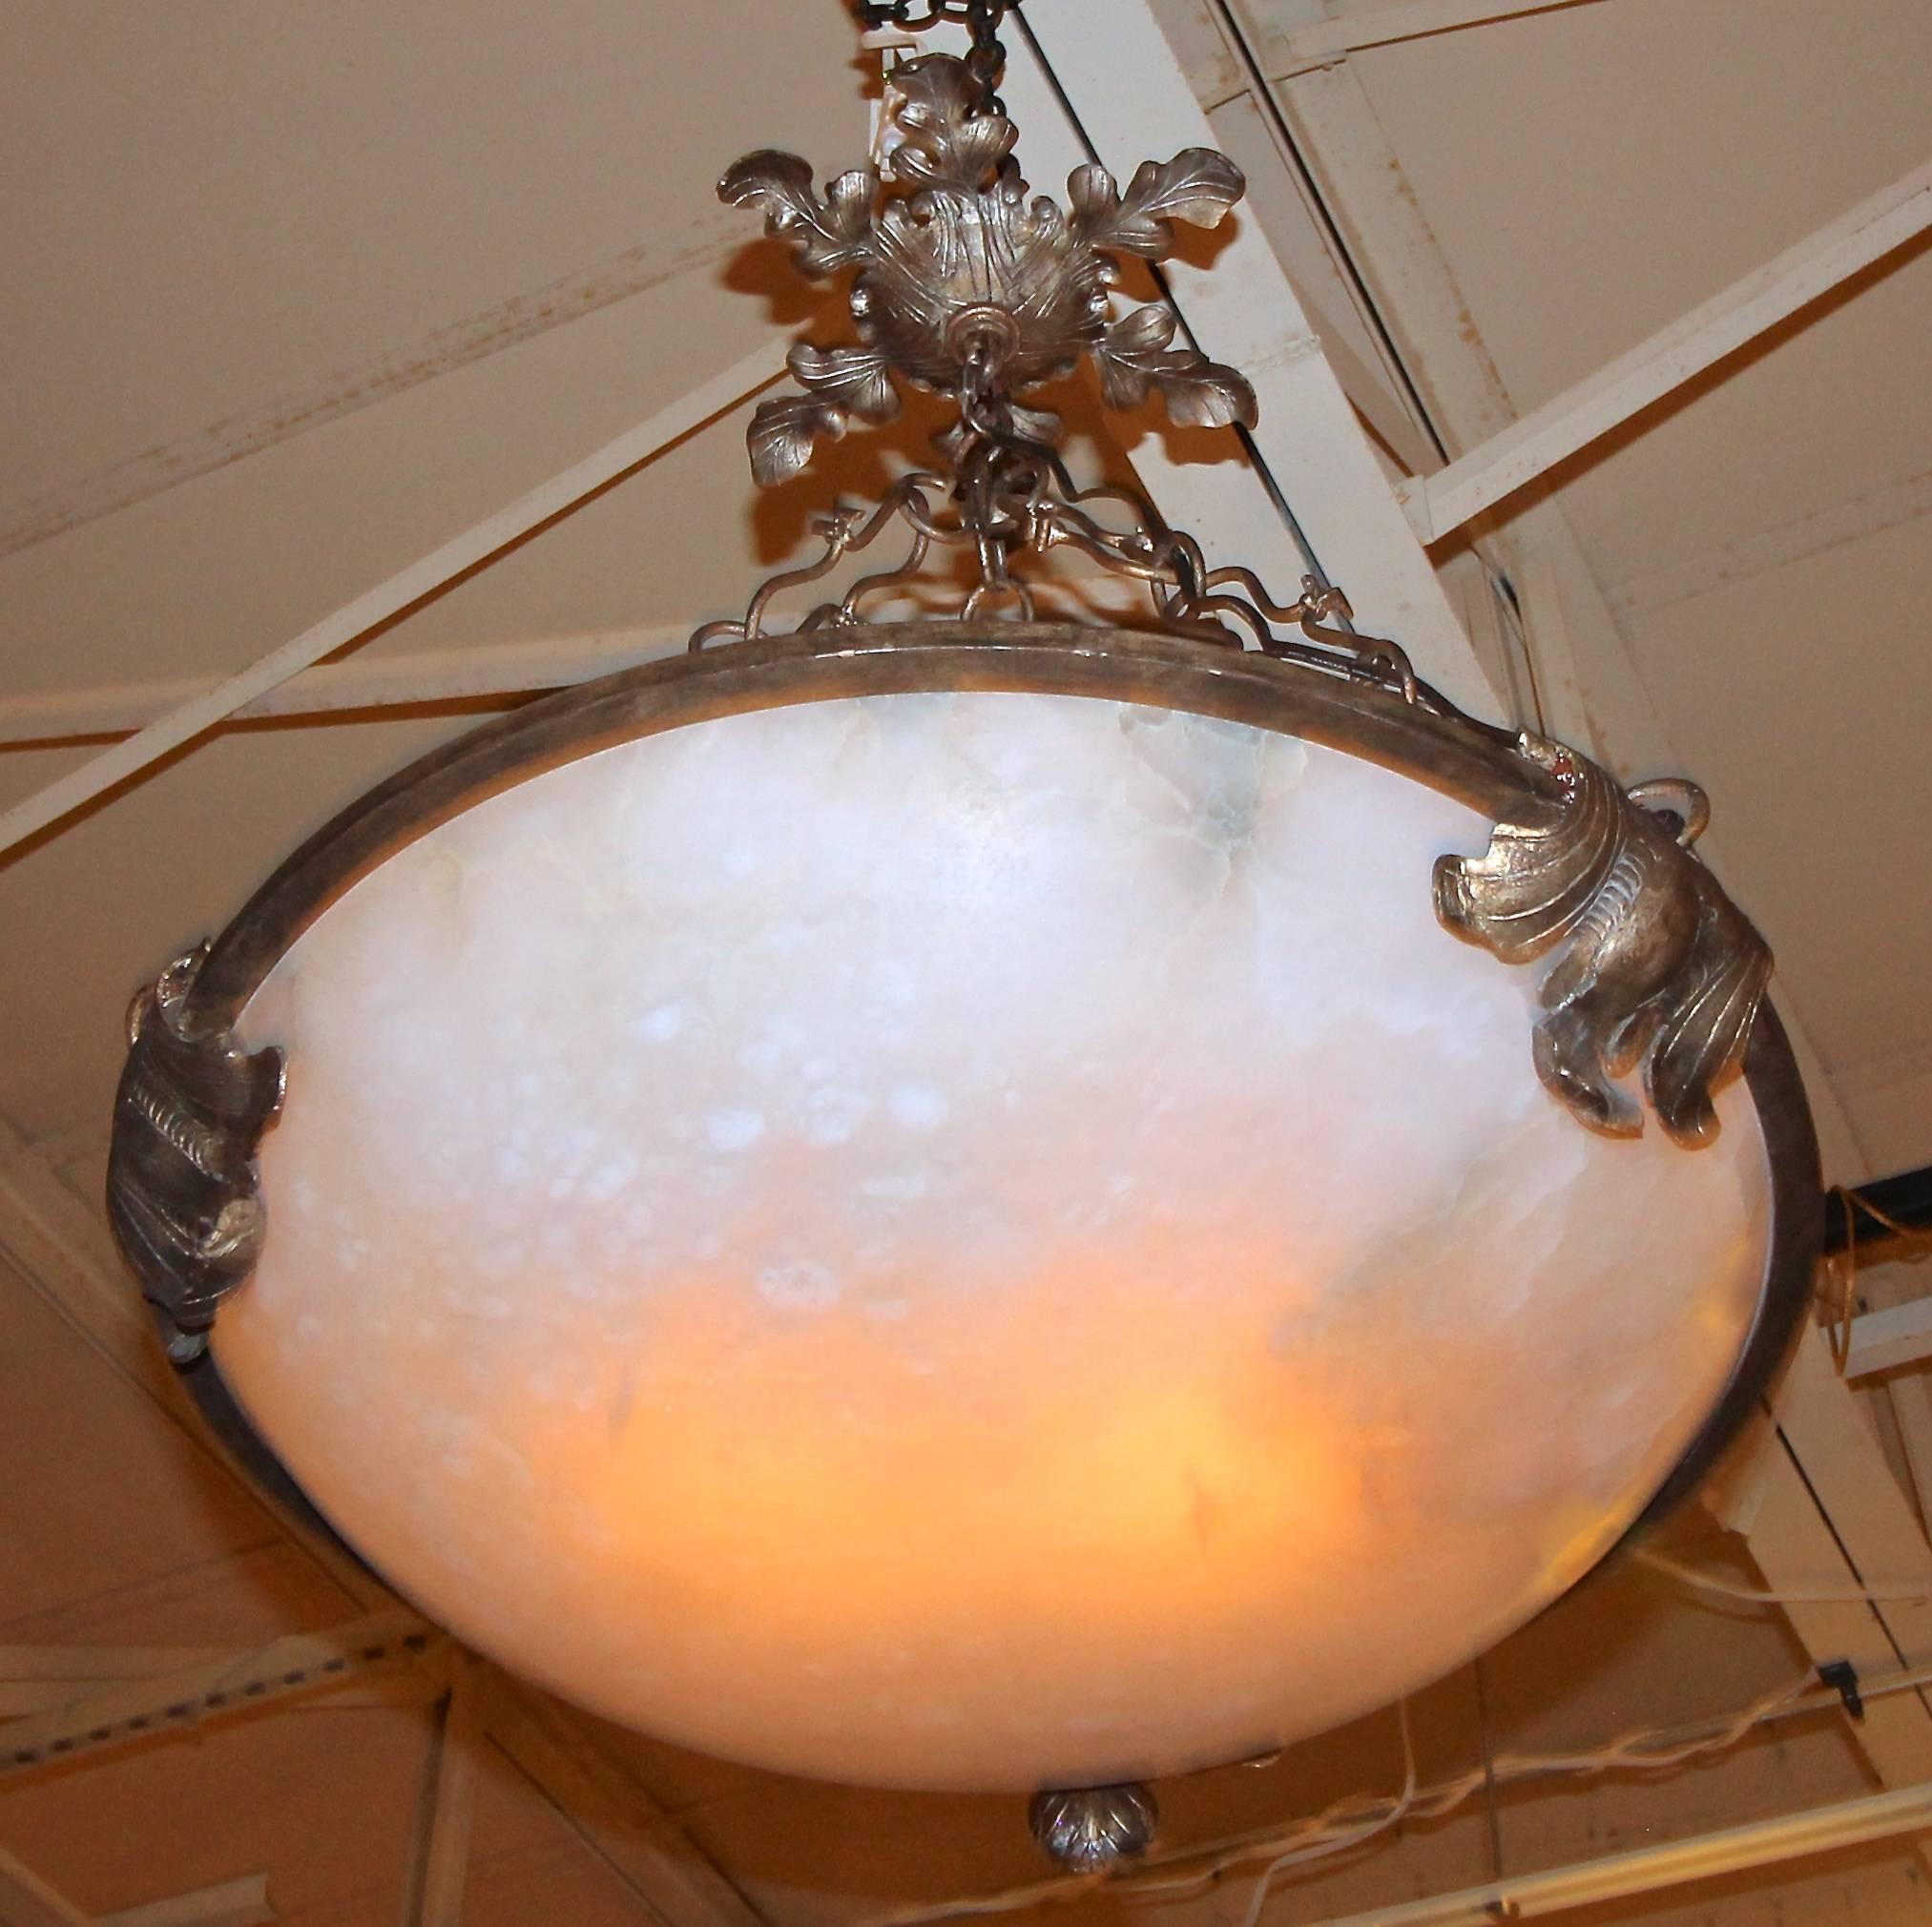 A dramatic pair of alabaster pendant light fixtures or chandeliers with hand-wrought acanthus scrolled ceiling cap and surround. Hand-forged chain links. Each light fixture uses 2 - 60 watt max "A"/Edison type bulbs. Large and dramatic